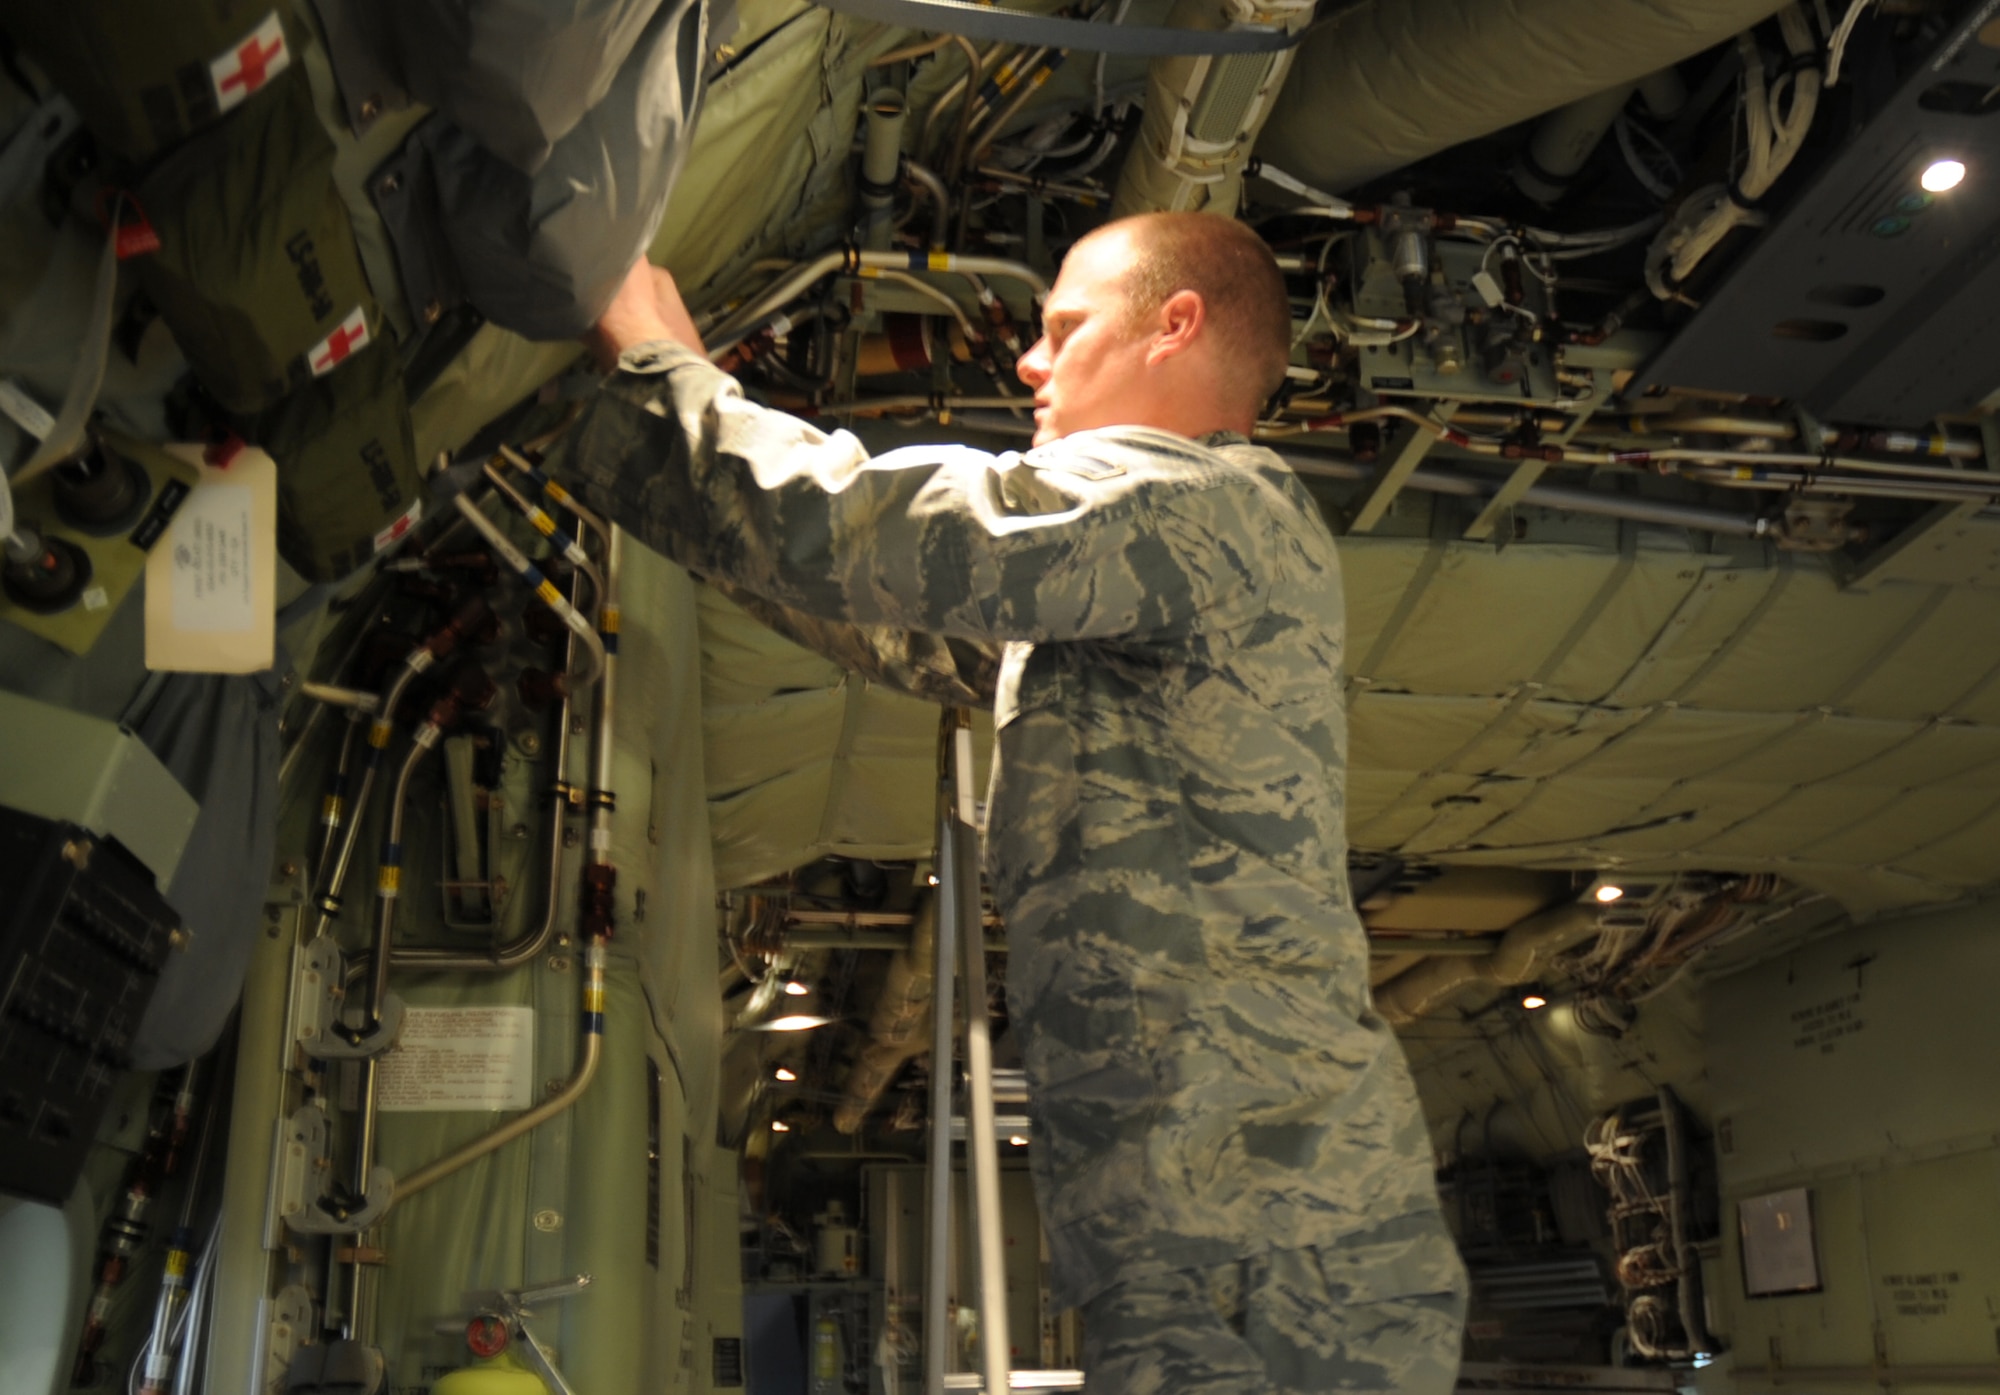 U.S. Air Force Airman 1st Class Danny Beckwith, 522nd Special Operations Squadron crew chief, inspects electrical components on the MC-130J Commando II at Cannon Air Force Base, N.M., March 7, 2012. Crew chiefs must ensure aircraft configurations meet Air Force Special Operations Command standards before they are cleared for flight. (U.S. Air Force photo by Airman 1st Class Alexxis Pons Abascal) 